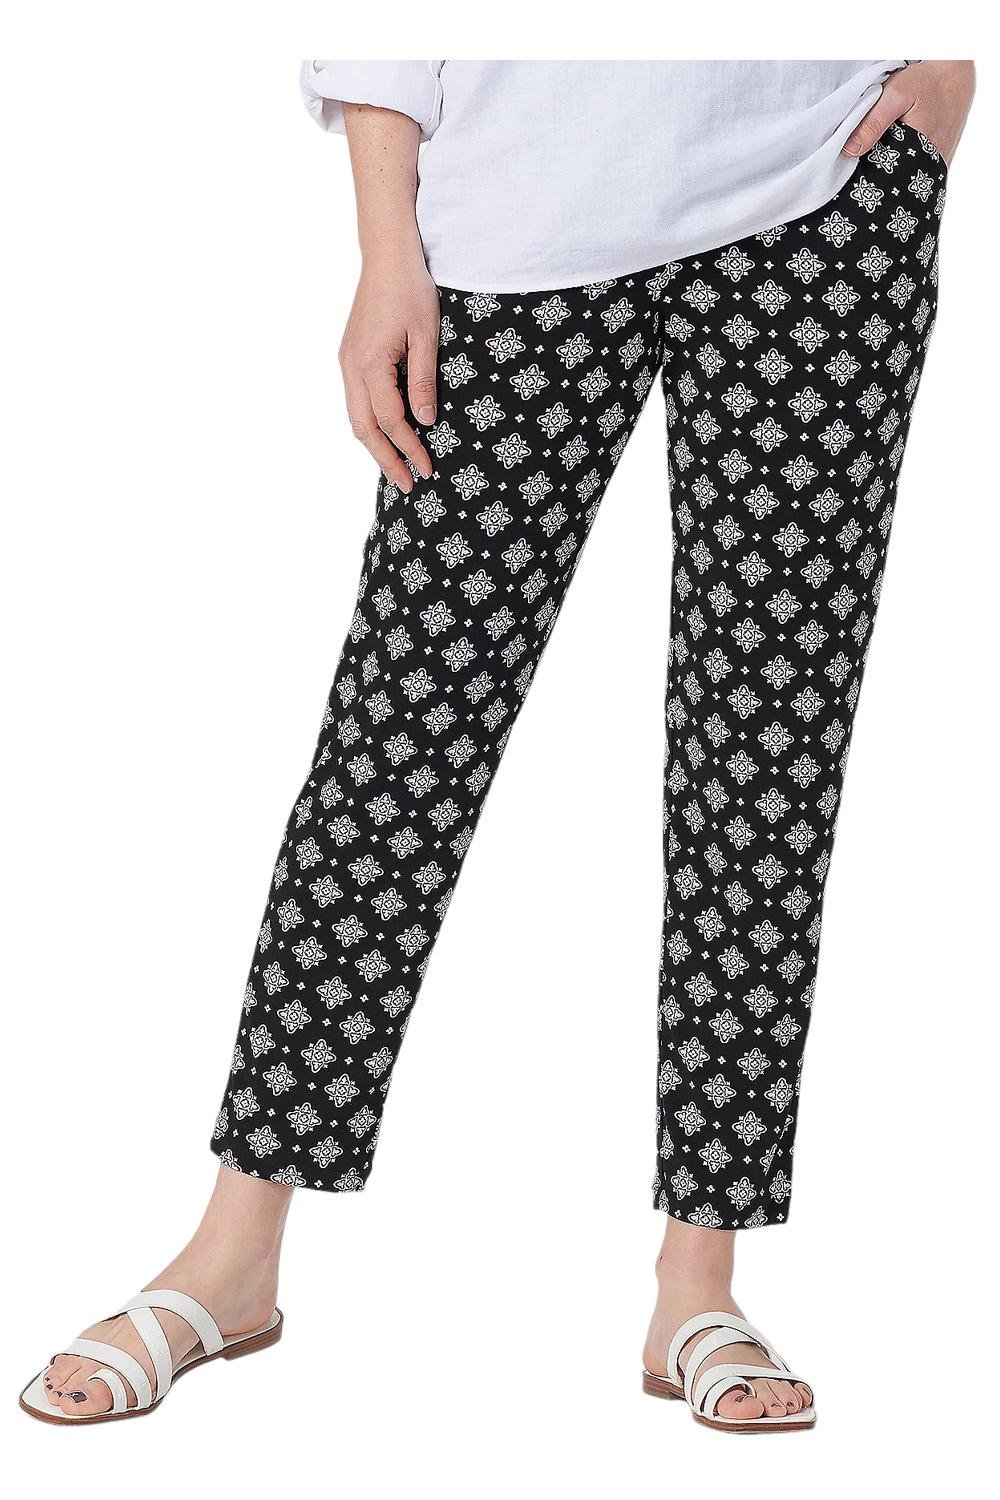 Denim & Co. Printed Jersey Pull-On Slim Ankle Pants with Tie Waist Blk